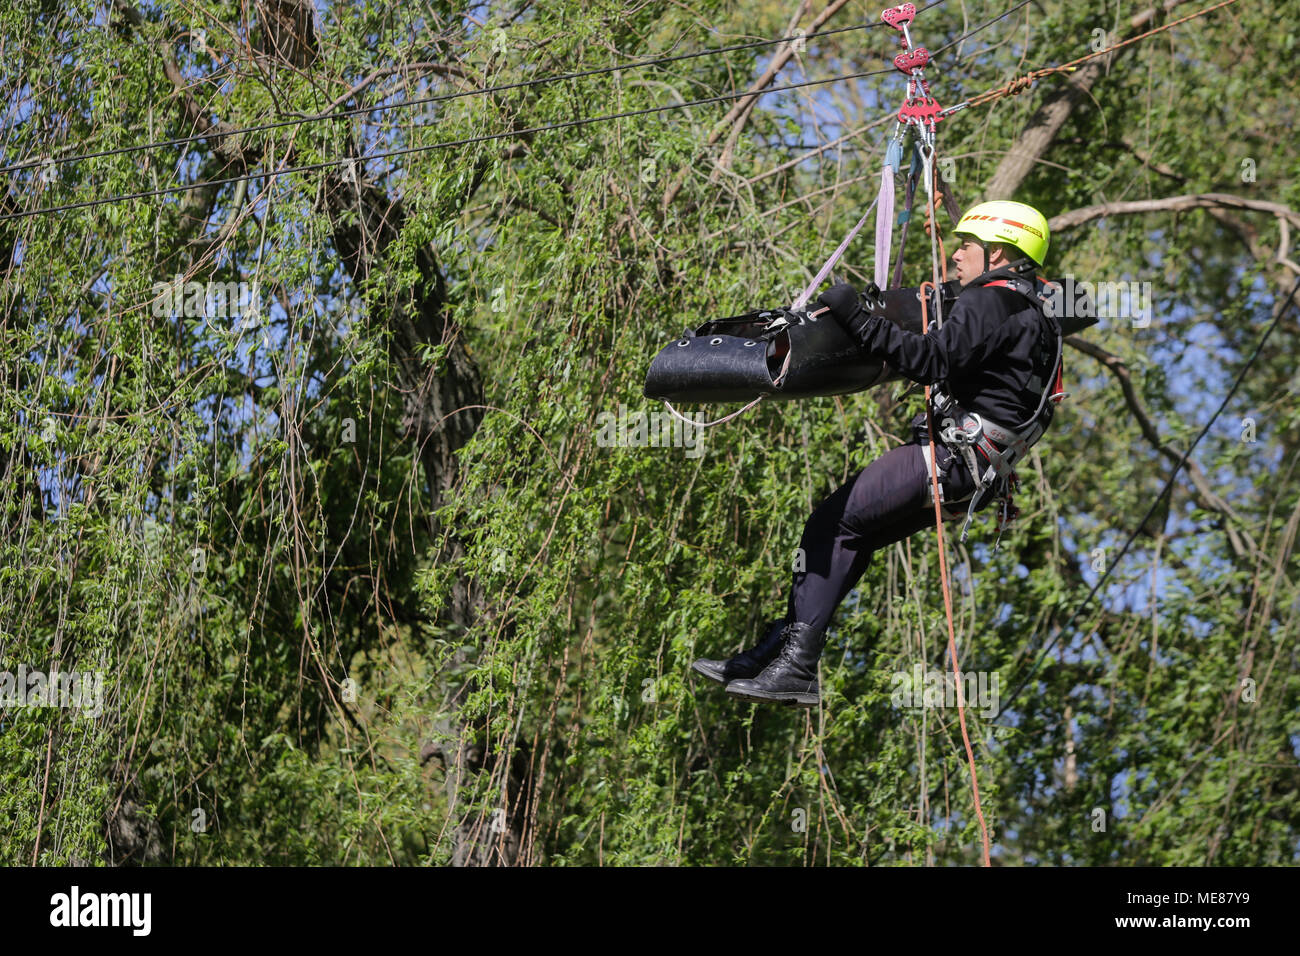 Bucharest, Romania. 21st April, 2018. Firefighters are rappelling and climbing ropes at a drill exercise, on April 21, 2017, in Bucharest Credit: MoiraM/Alamy Live News Stock Photo